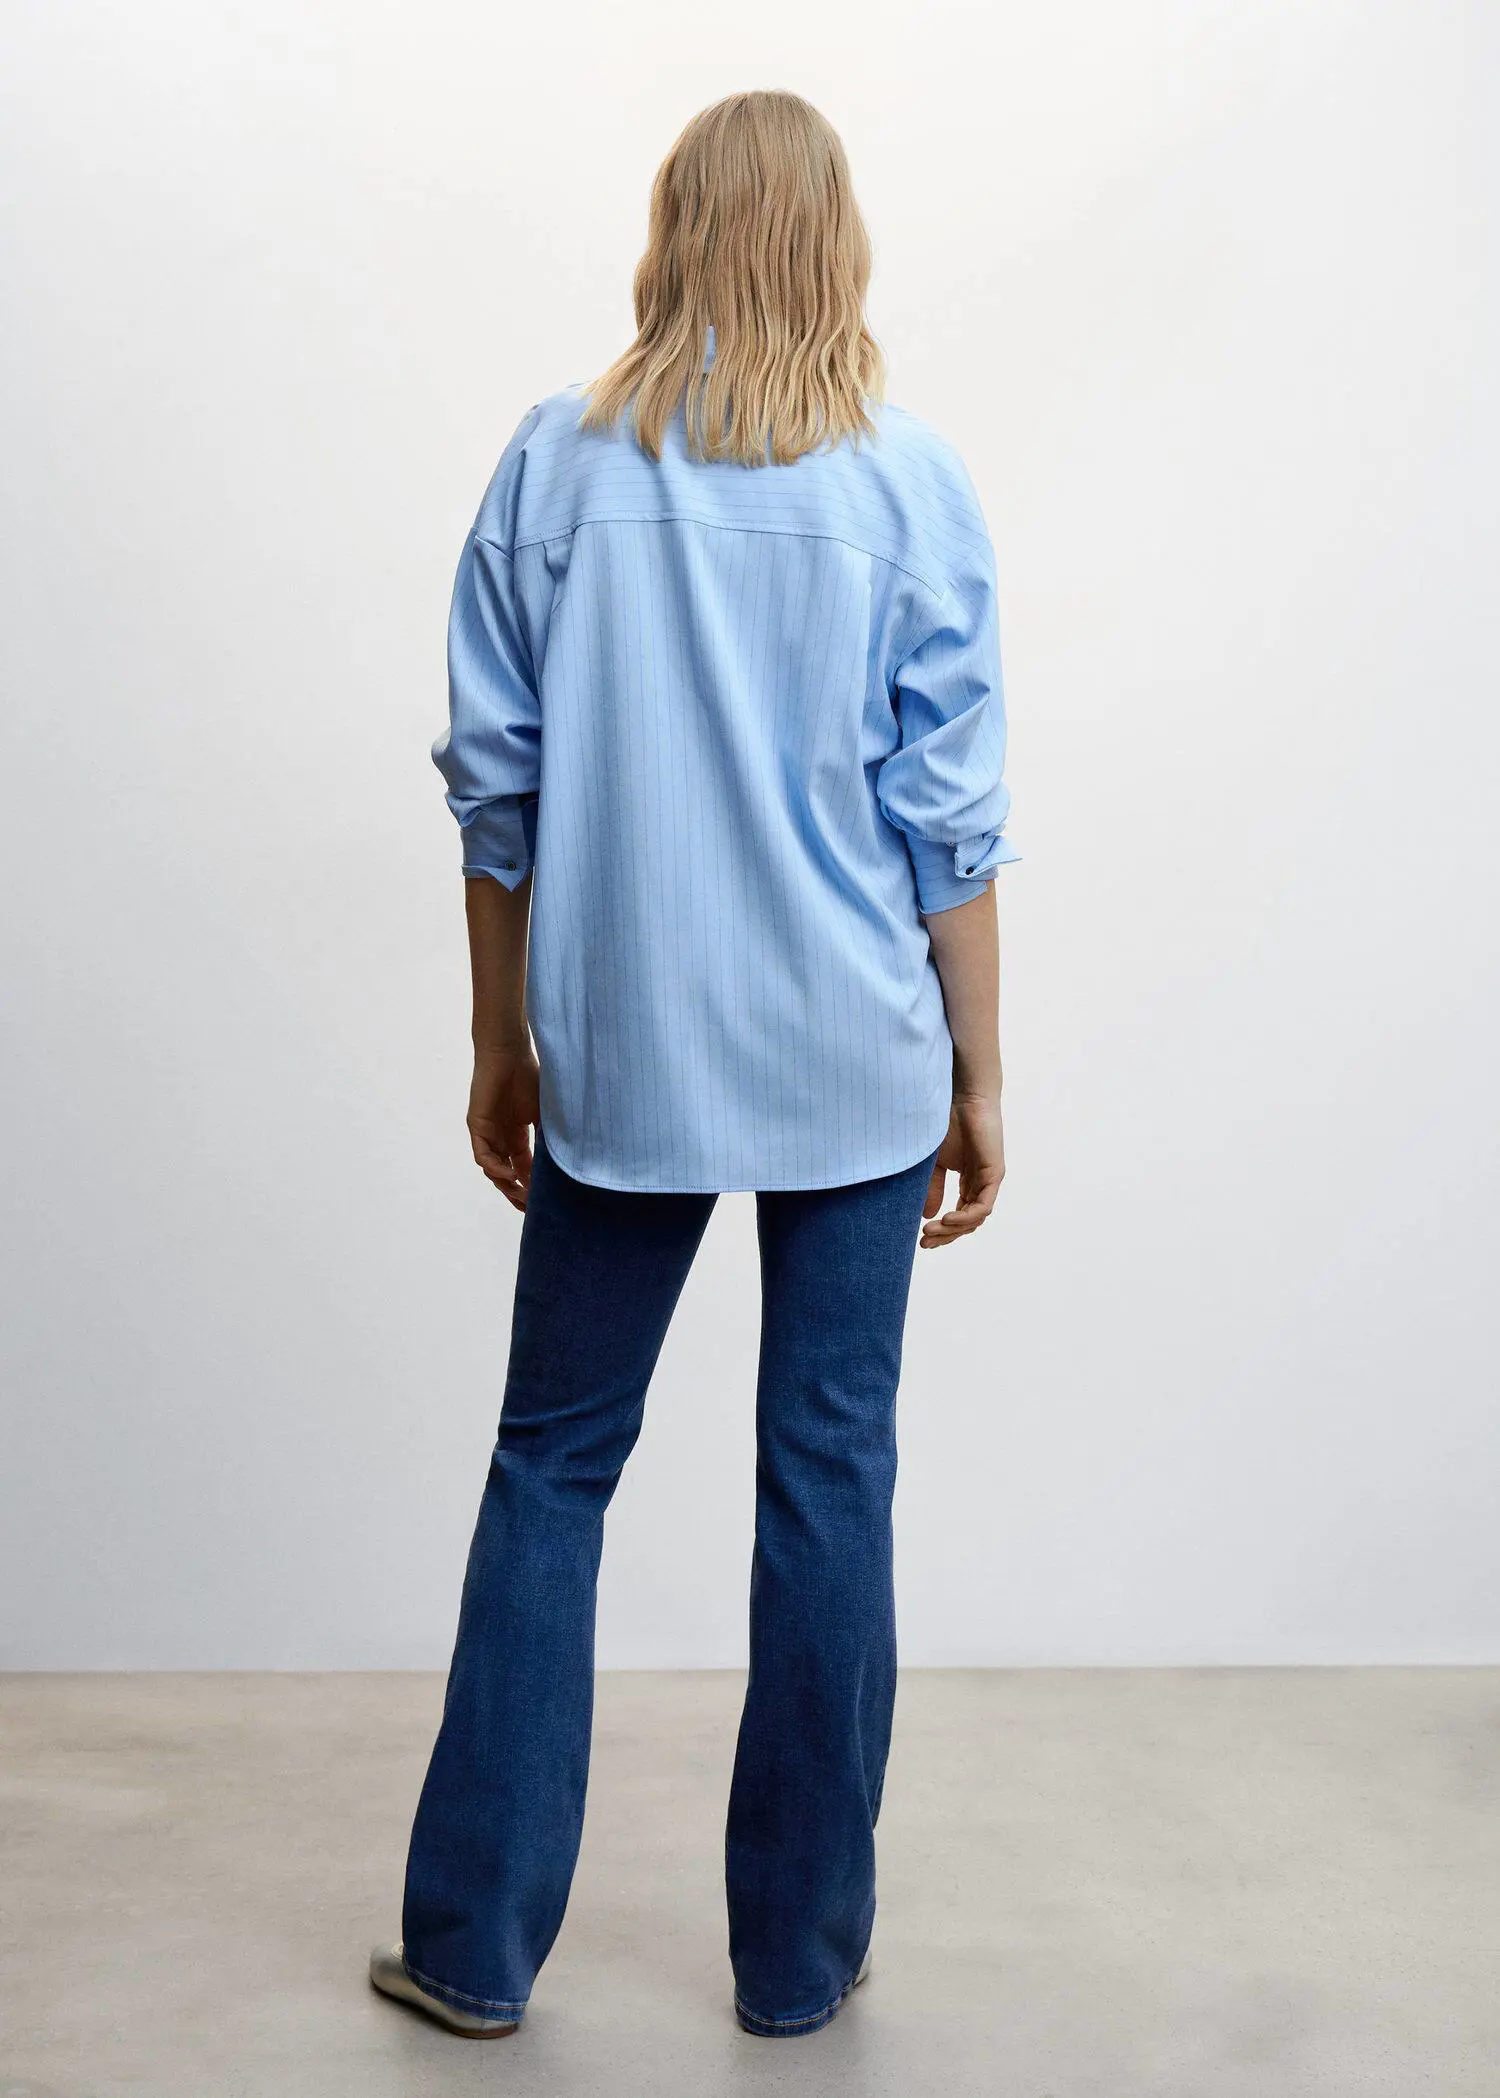 Mango Maternity flared jeans. a person standing in front of a white wall. 